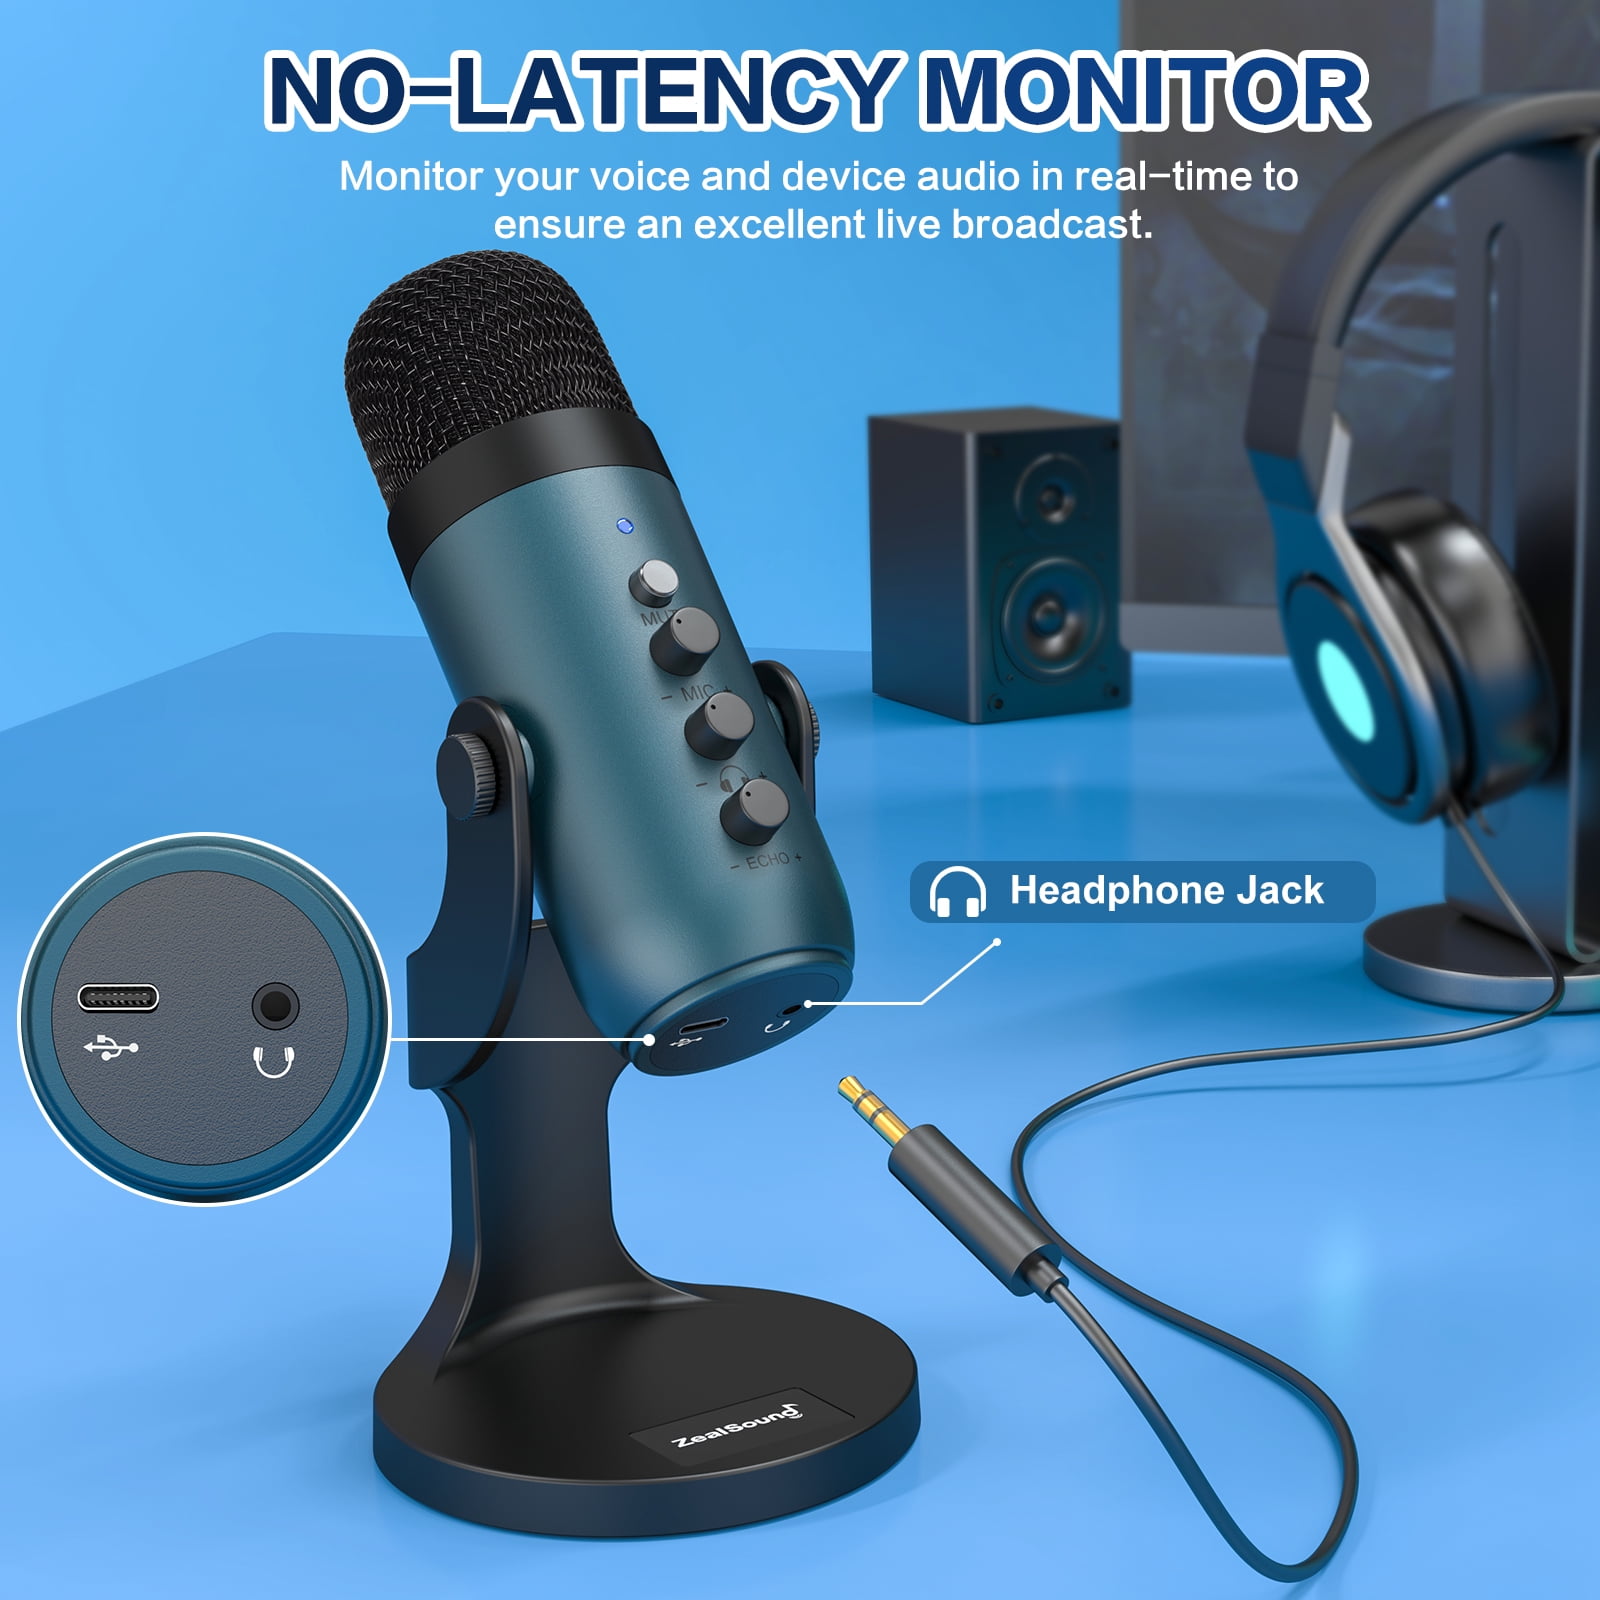 UK- Extreme discounts - bargains, coupons, deals and more. - ZealSound USB  Microphone Condenser Recording Microphone Kit, Plug & Play Microphone for  Phone, Laptop, MAC Windows, ASMR Garageband Smule Stream 